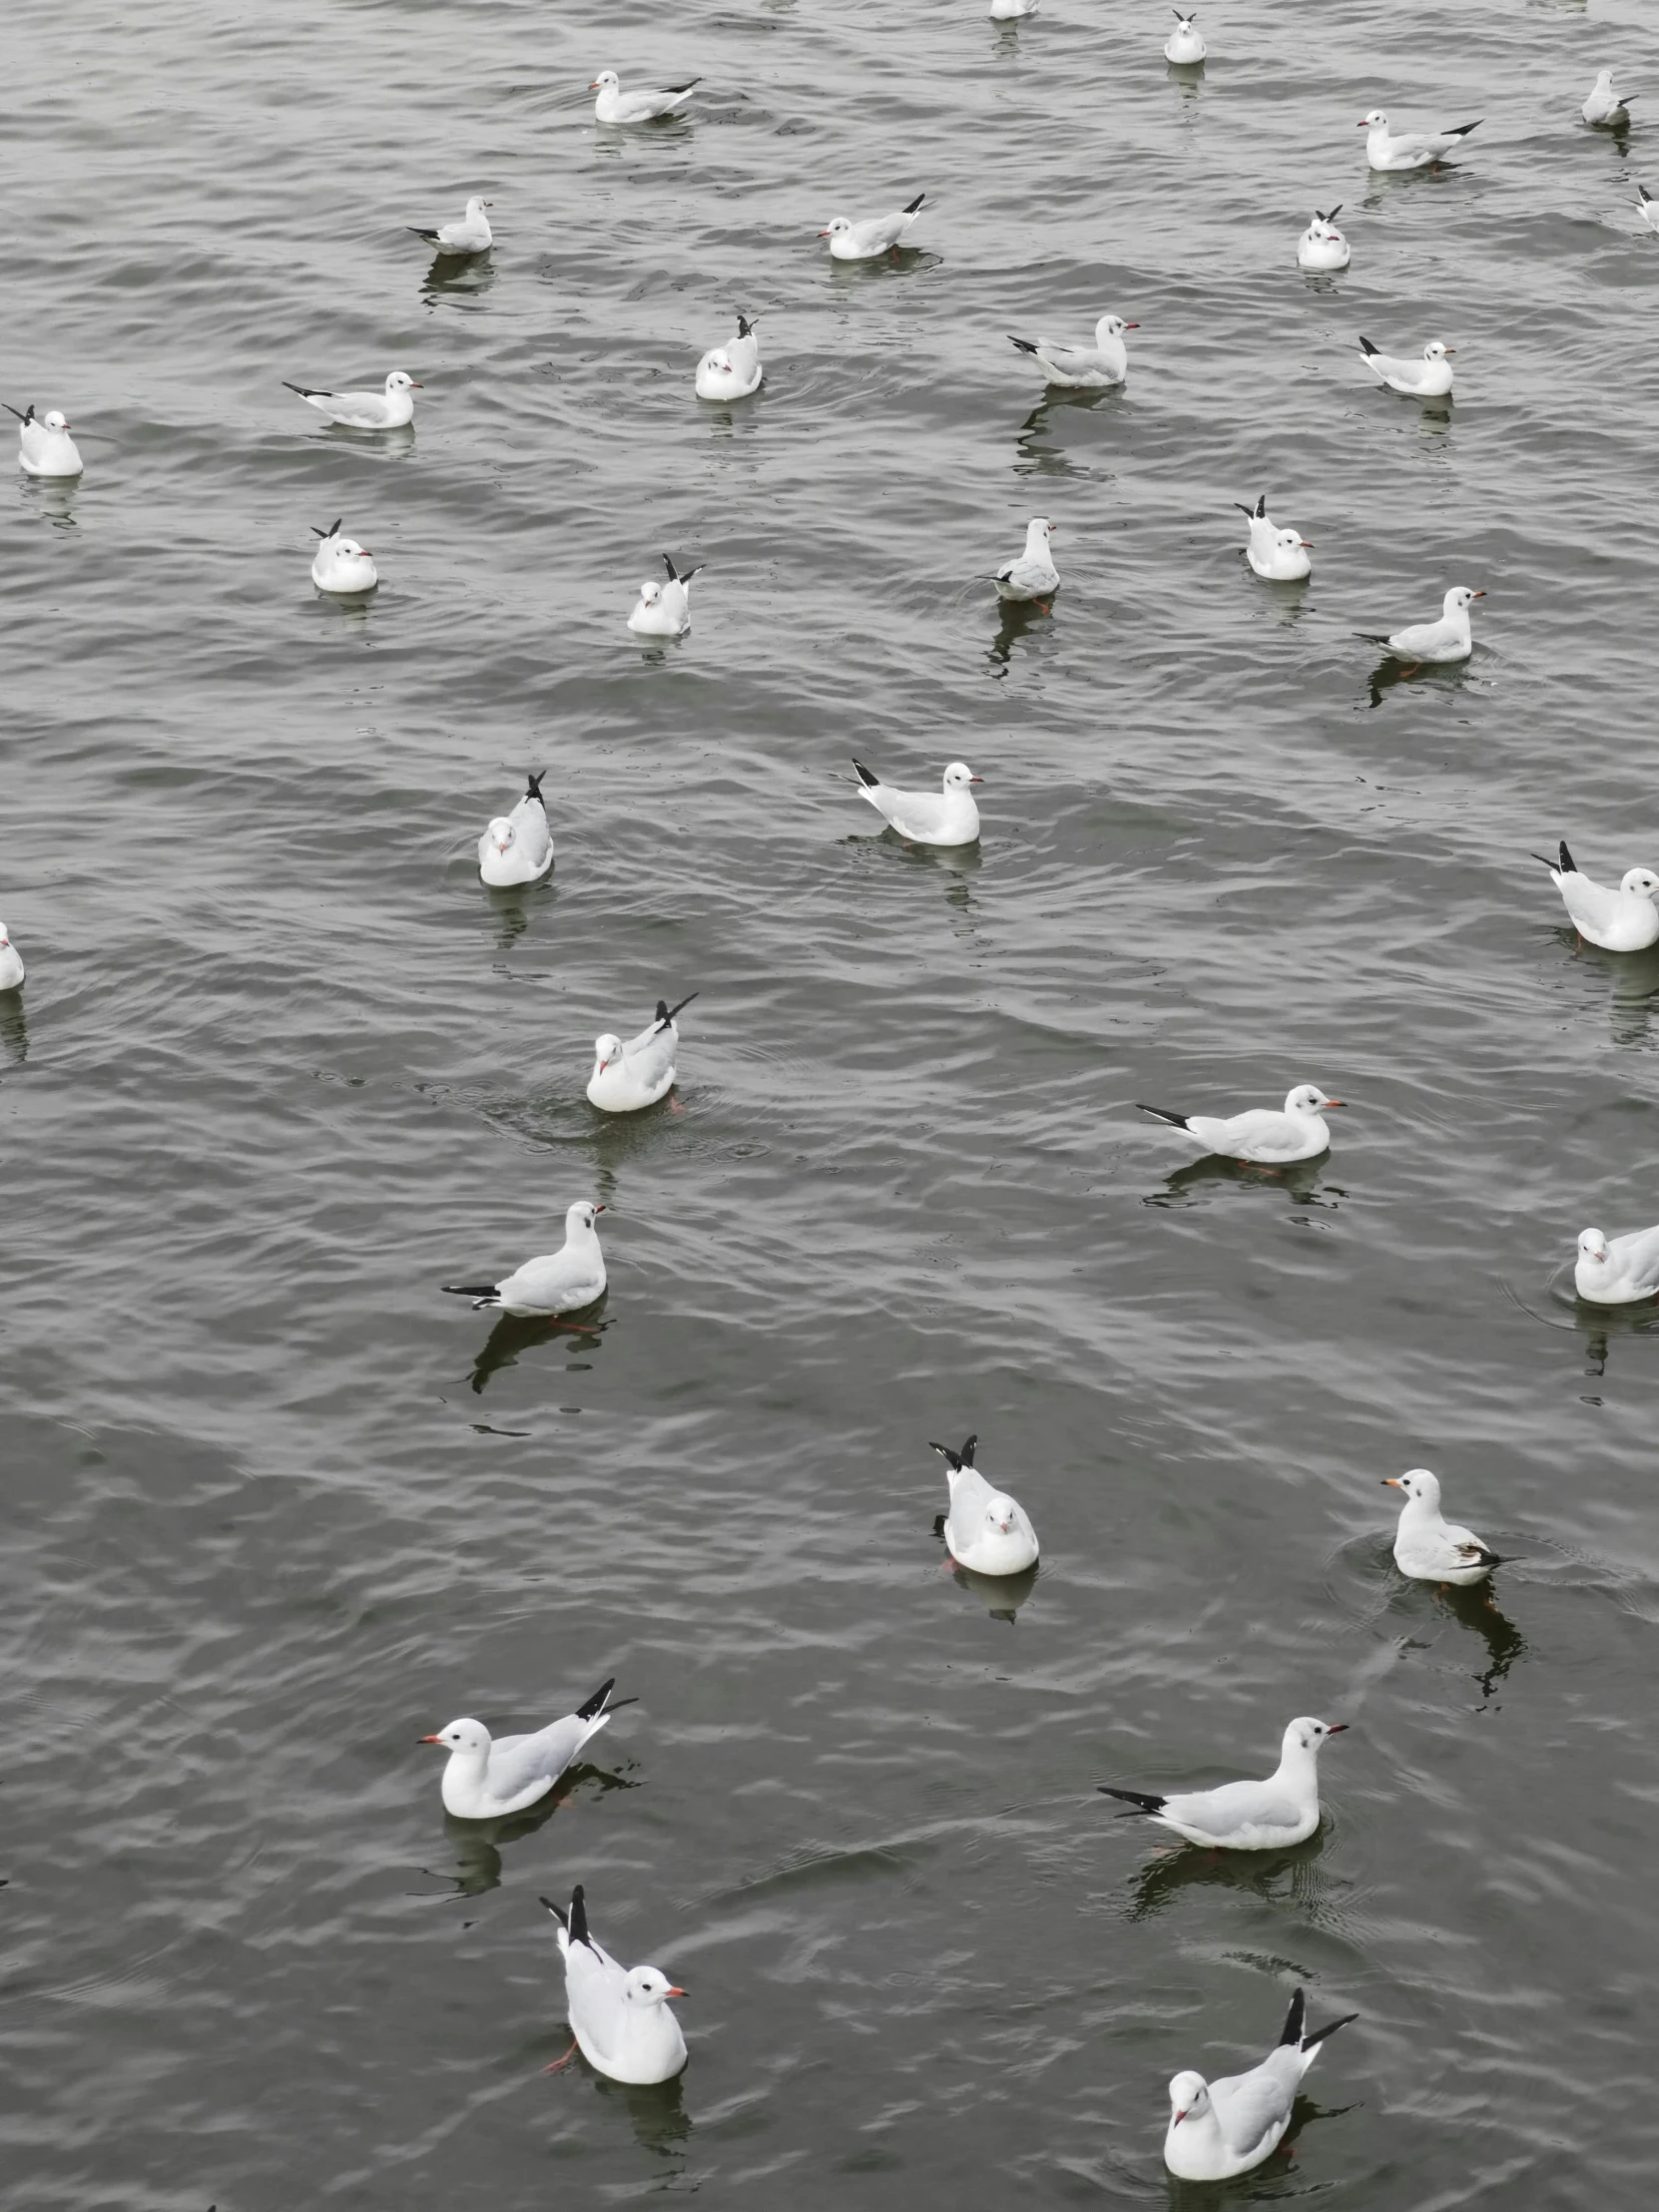 there are many seagulls on the water